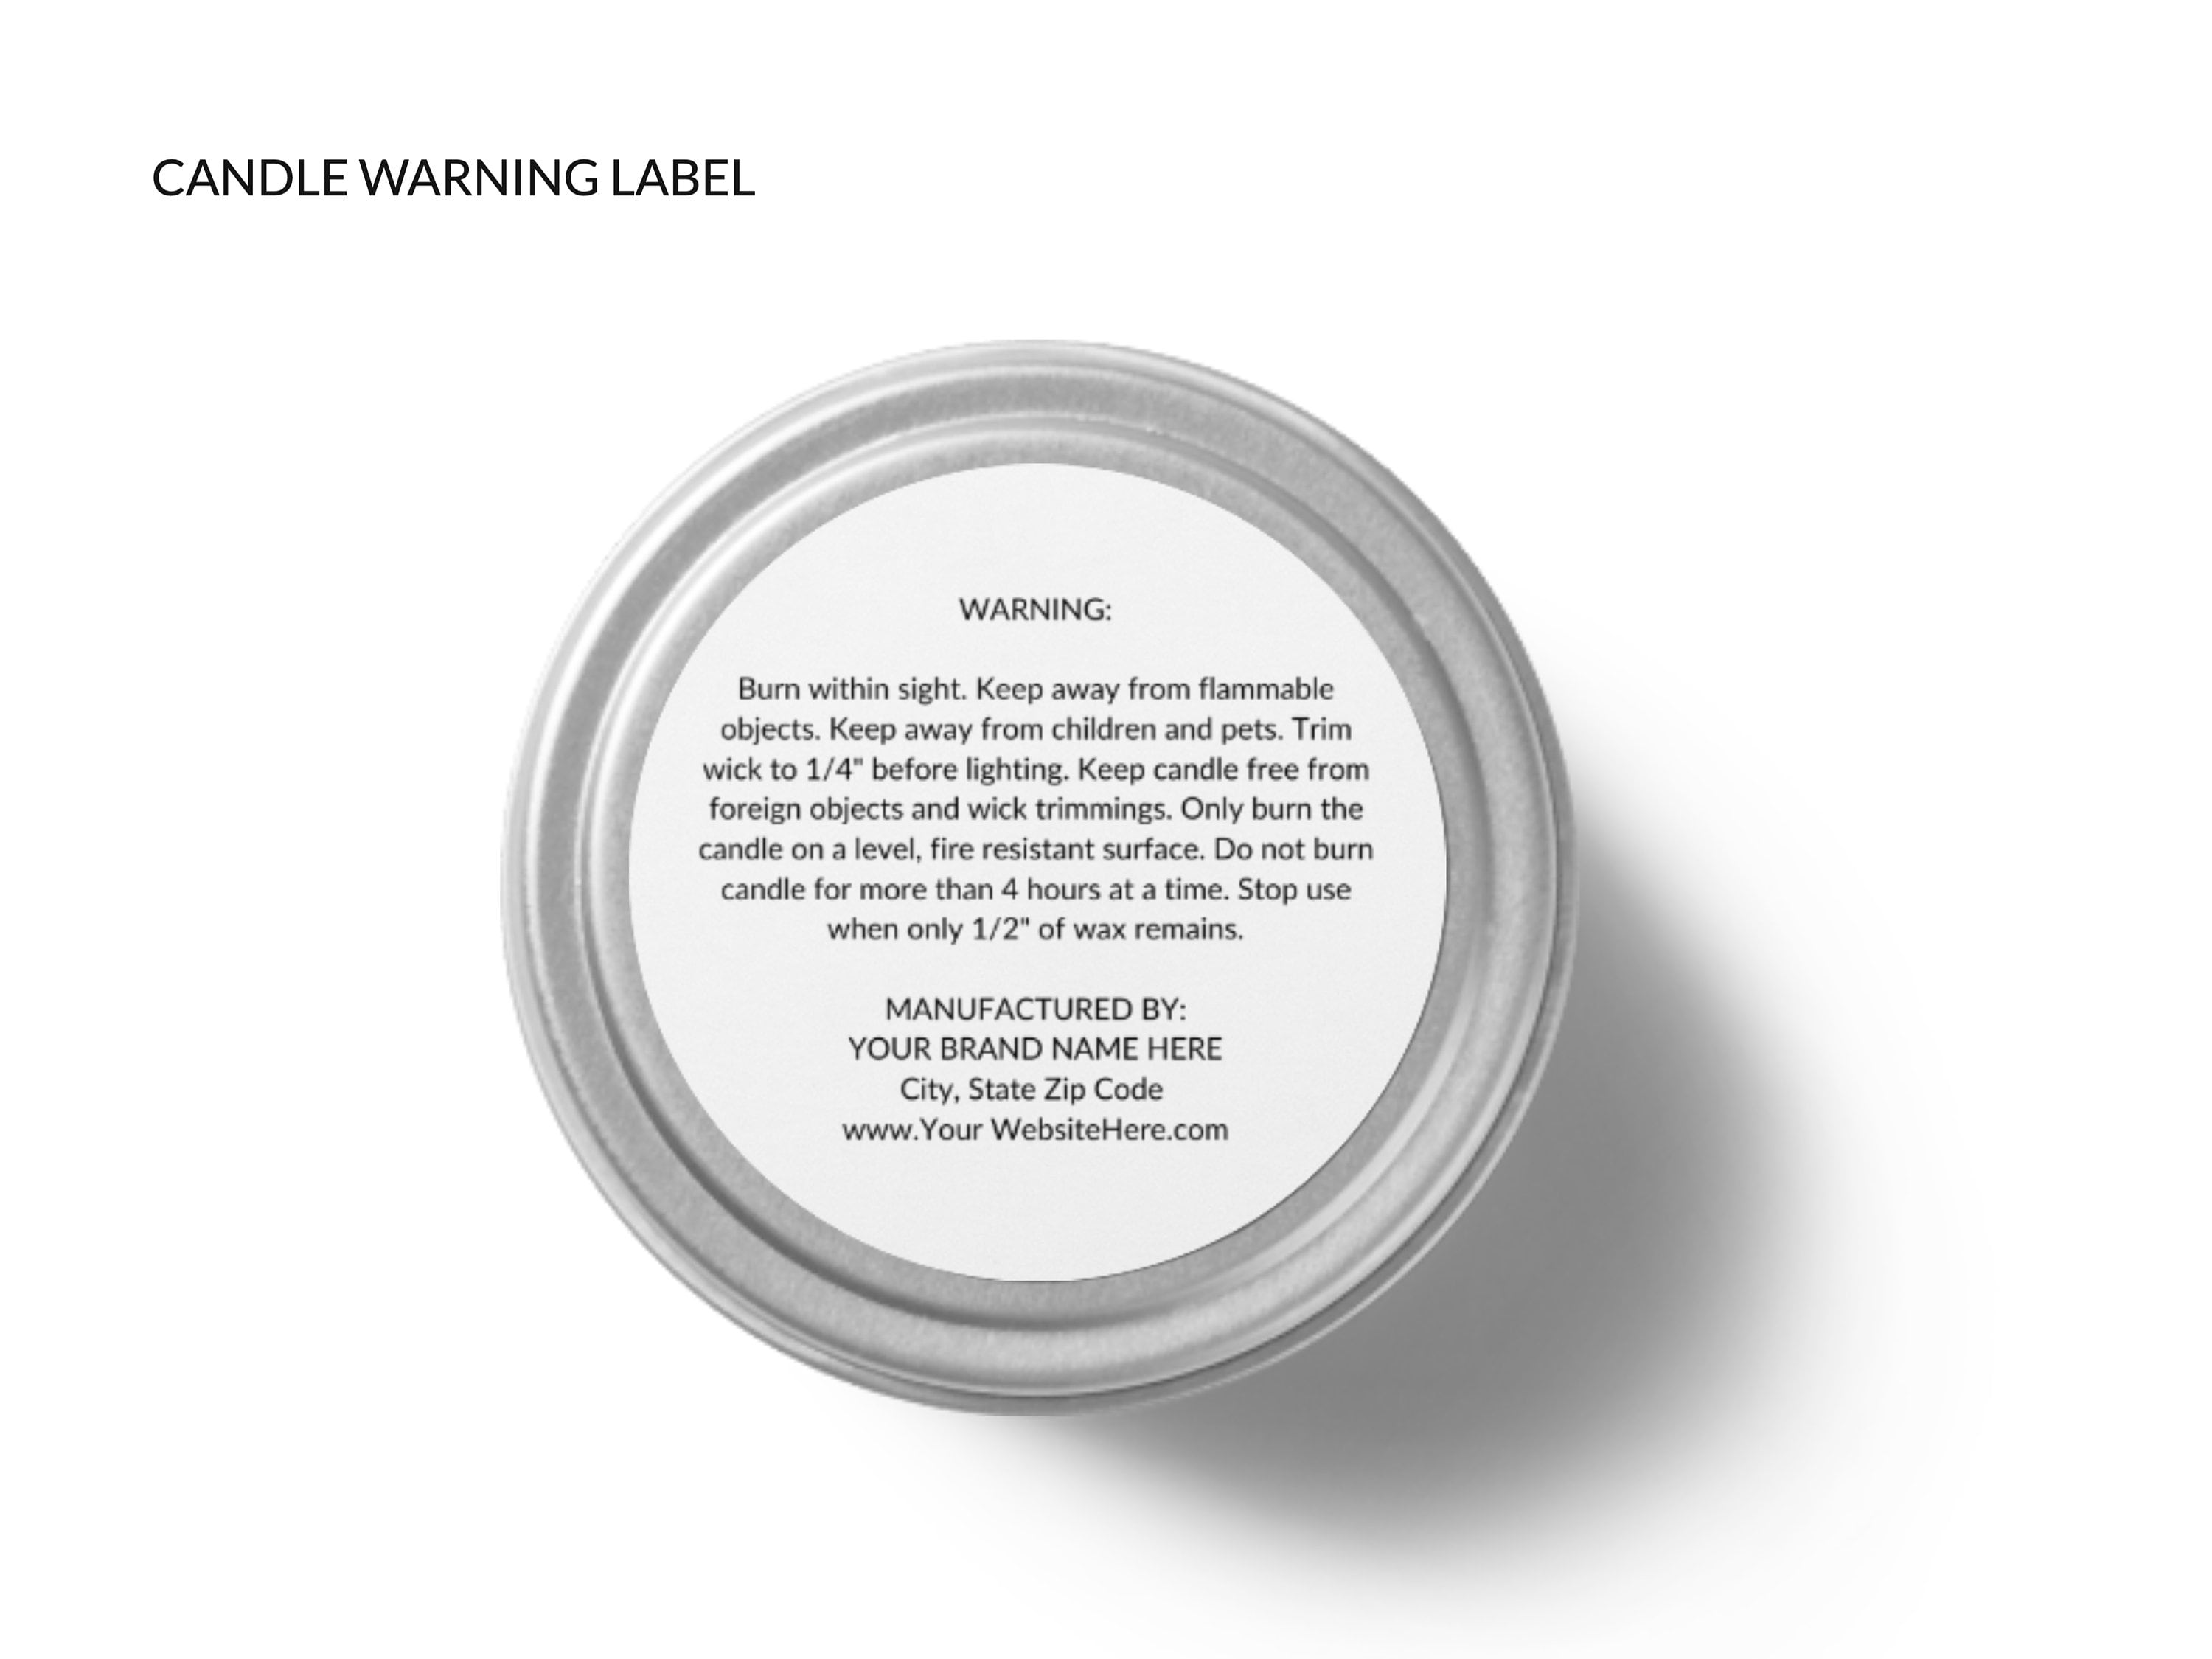 Candle Warning Label 2 Inch – Pro Candle Supply